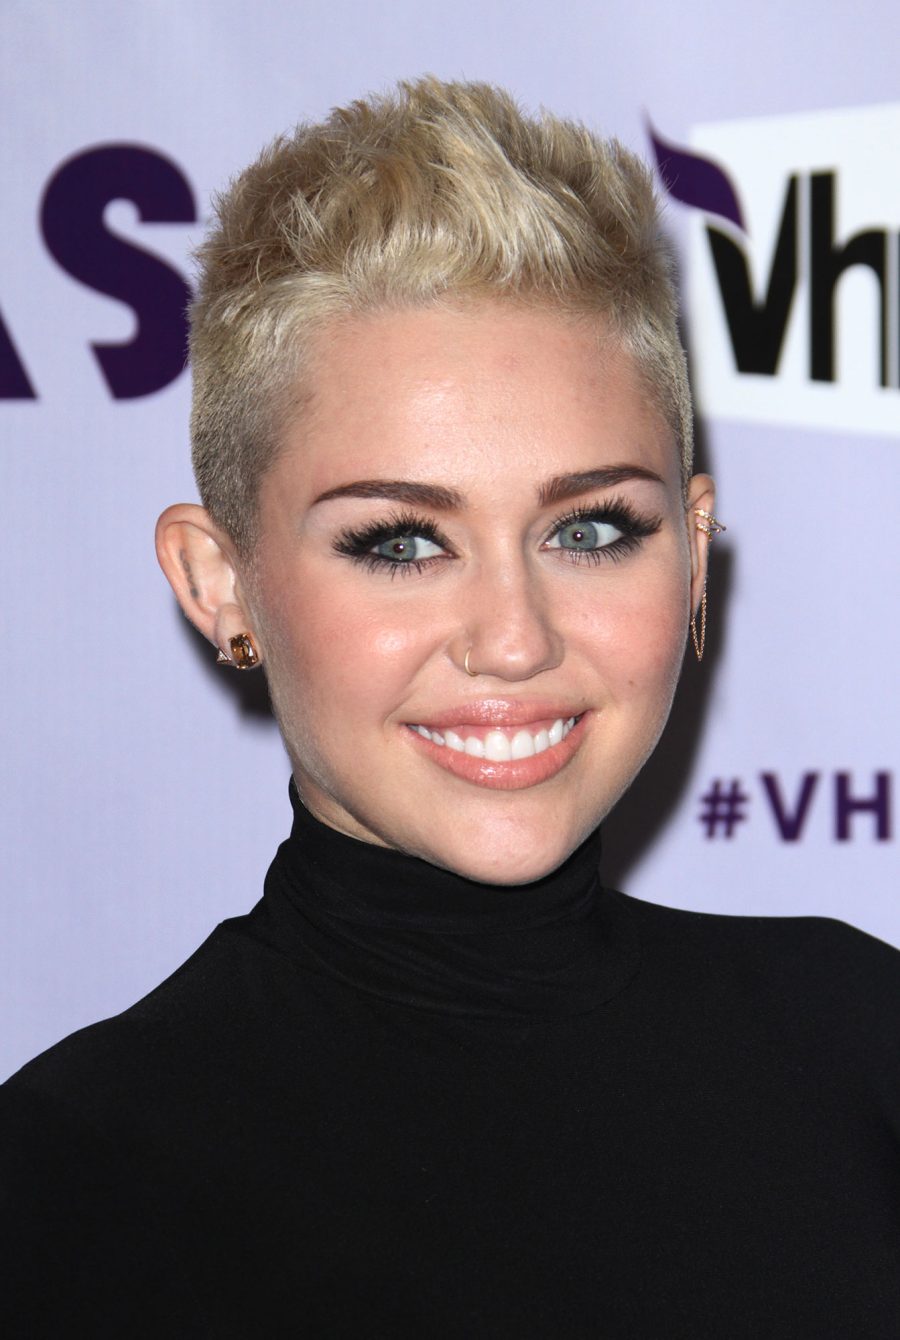 16 Dec 2012 A Spiked Bleached Pixie Miley Cyrus Hair Evolution Over the Years